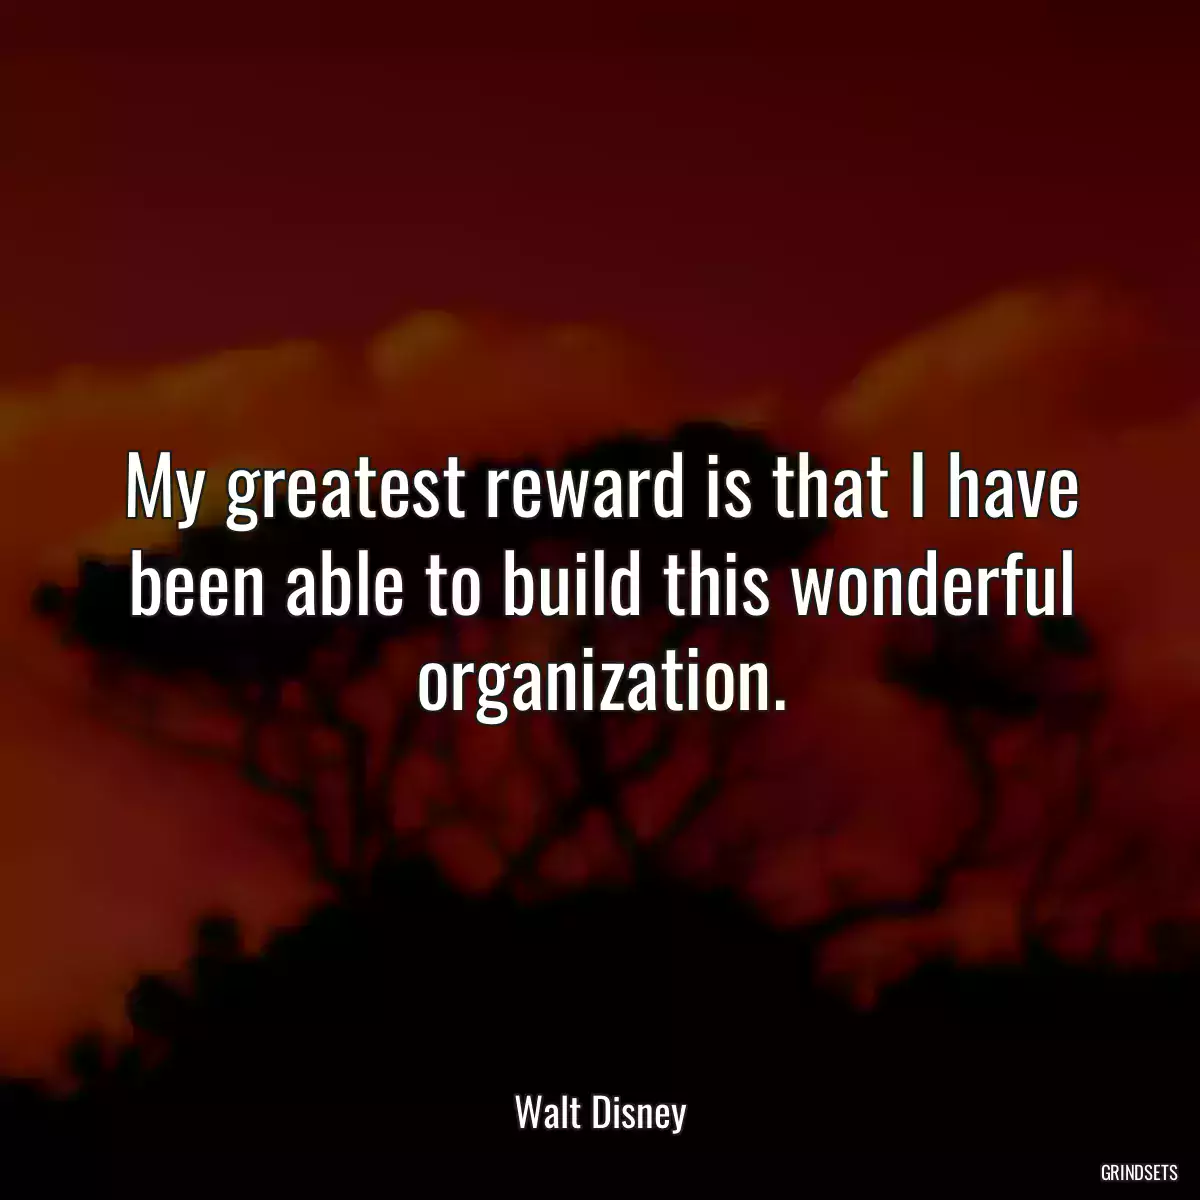 My greatest reward is that I have been able to build this wonderful organization.